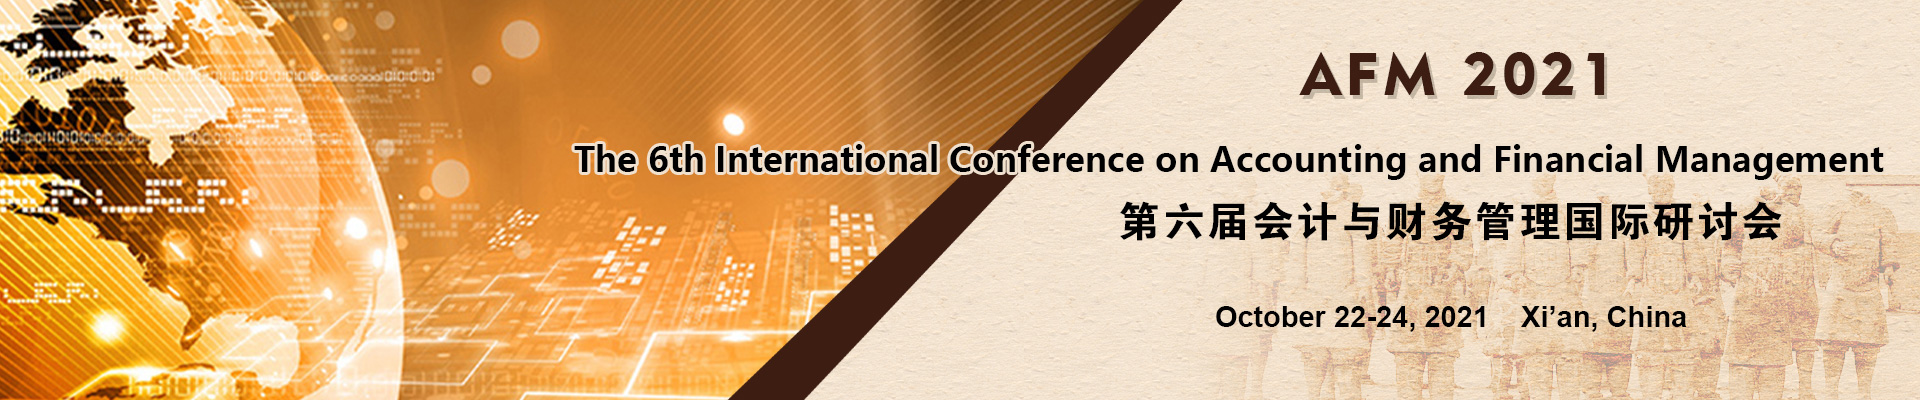 The 6th International Conference on Accounting and Financial Management (AFM 2021), Xi'an, Shaanxi, China